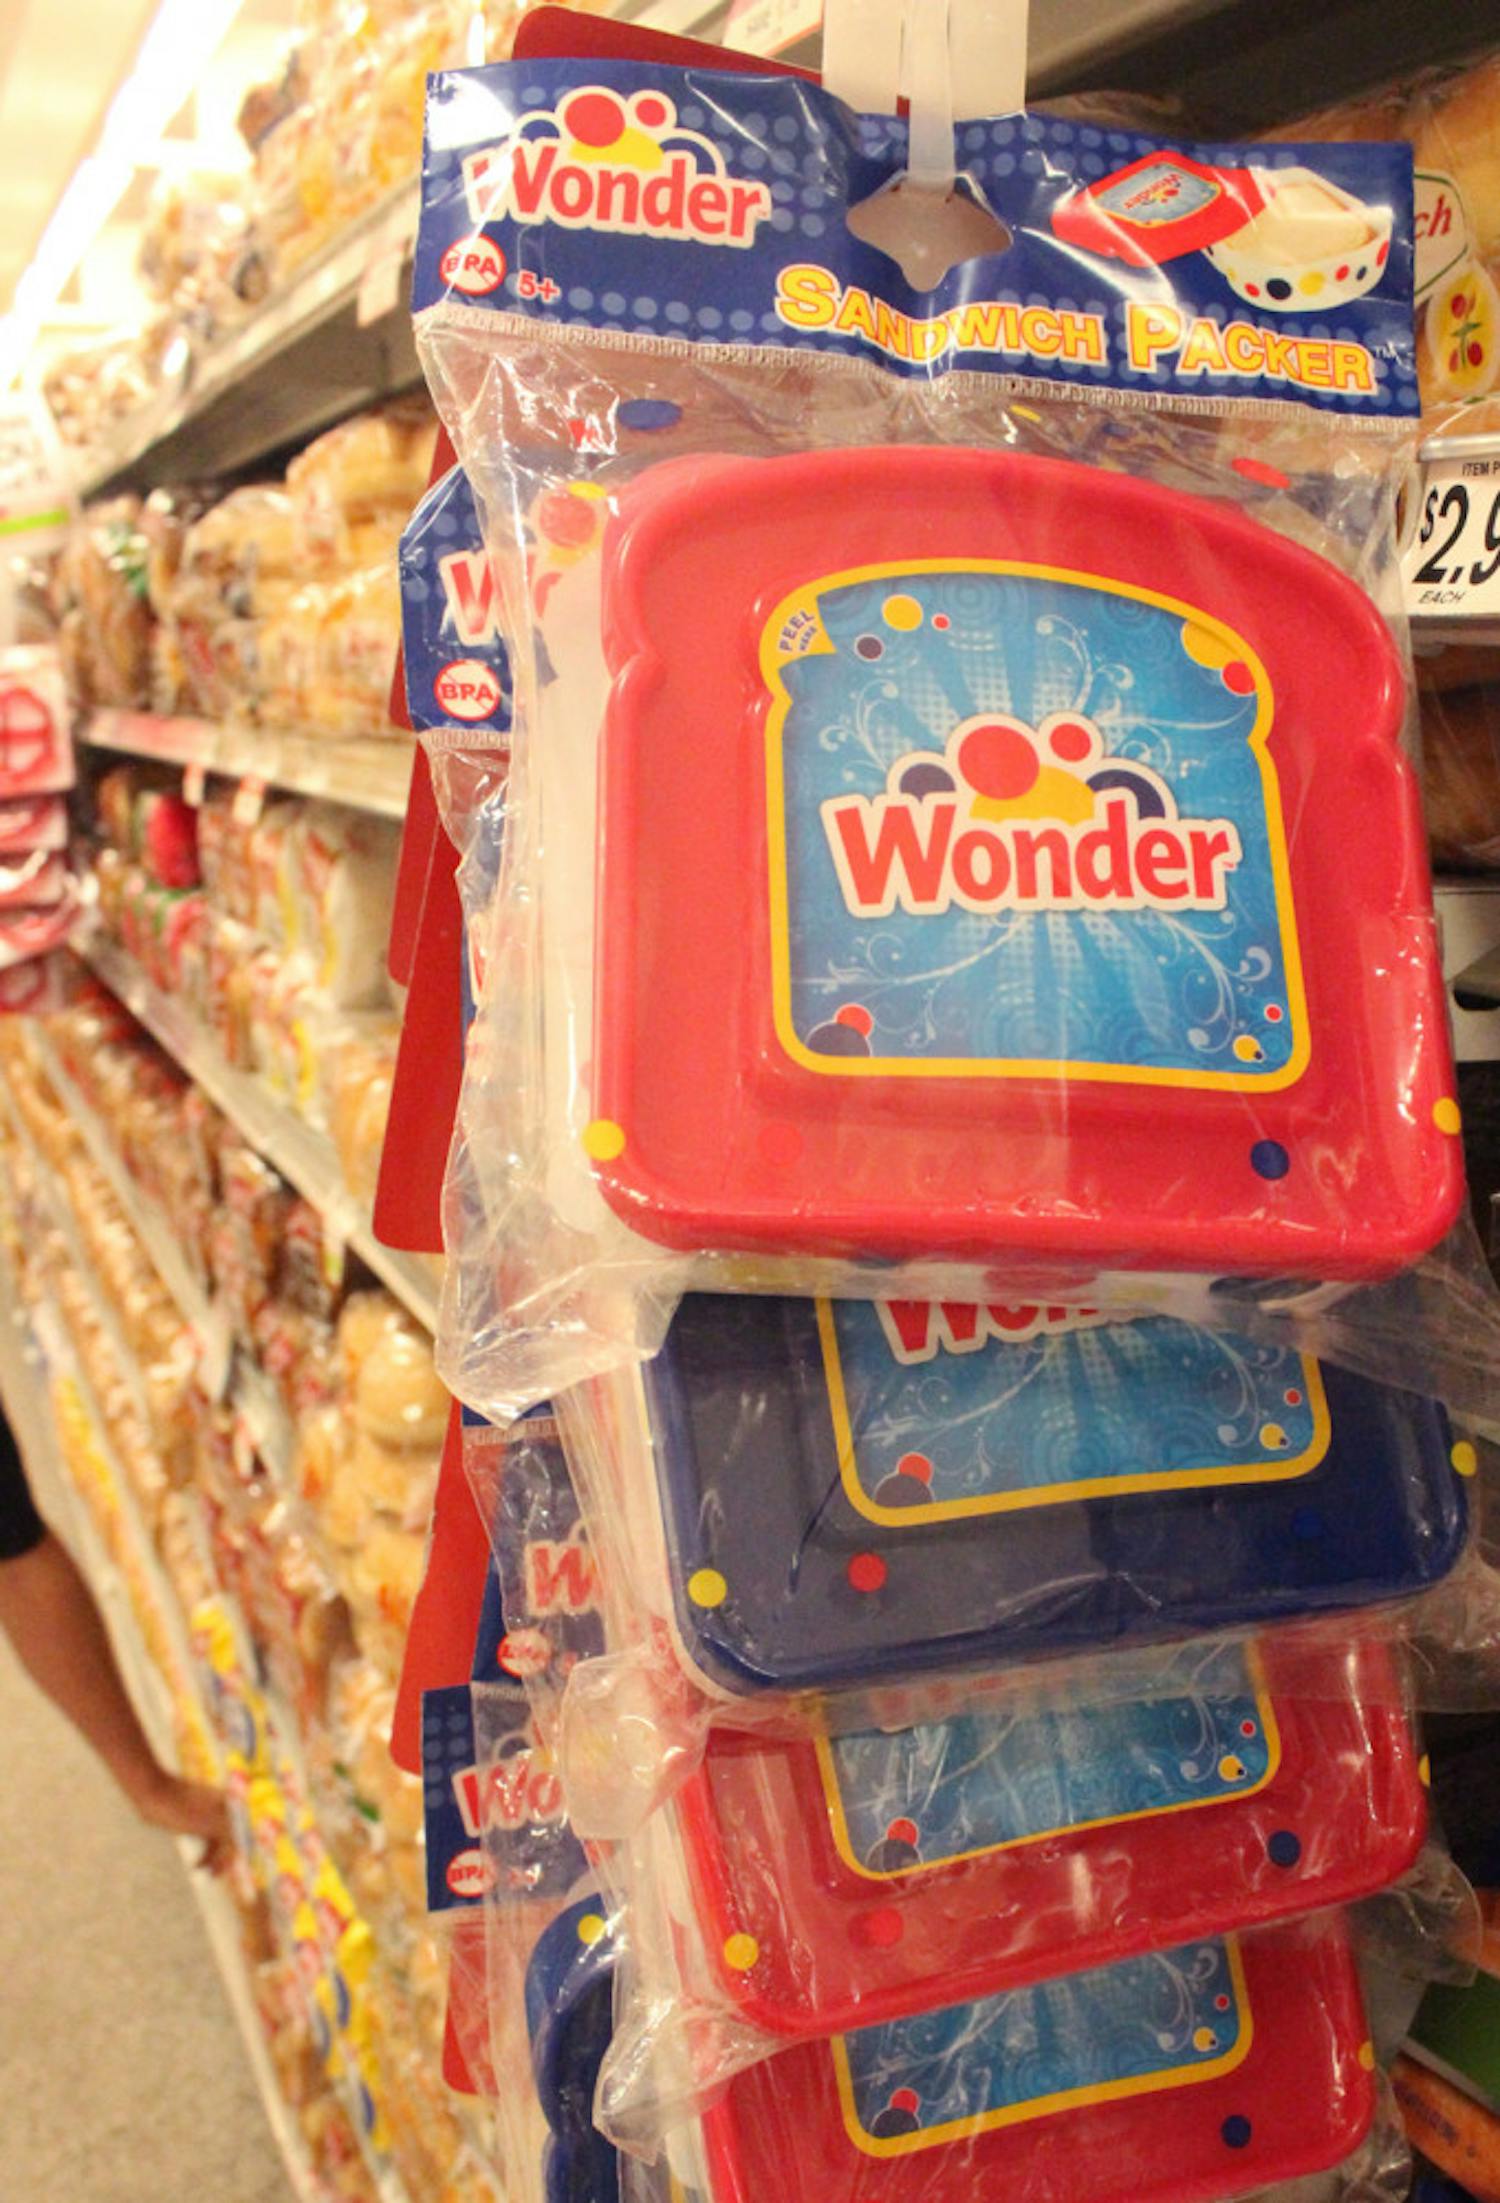 Wonder Bread is returning to grocery stores after being on hiatus for about a year when its former producer went bankrupt.